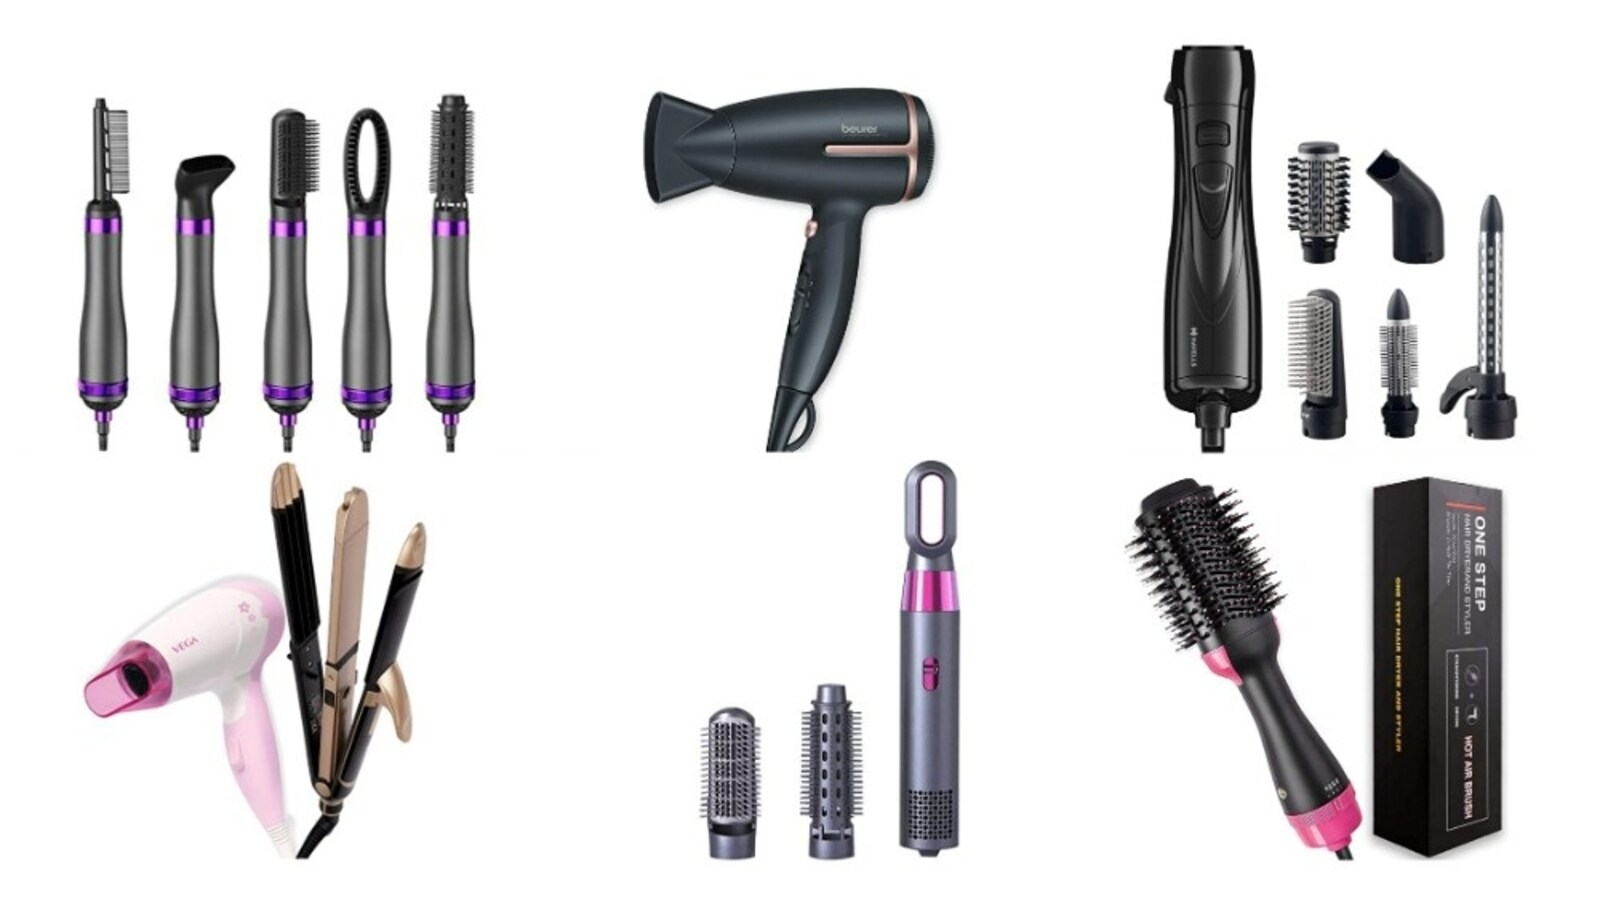 Hair dryers and stylers: Here are the best deals worth your money